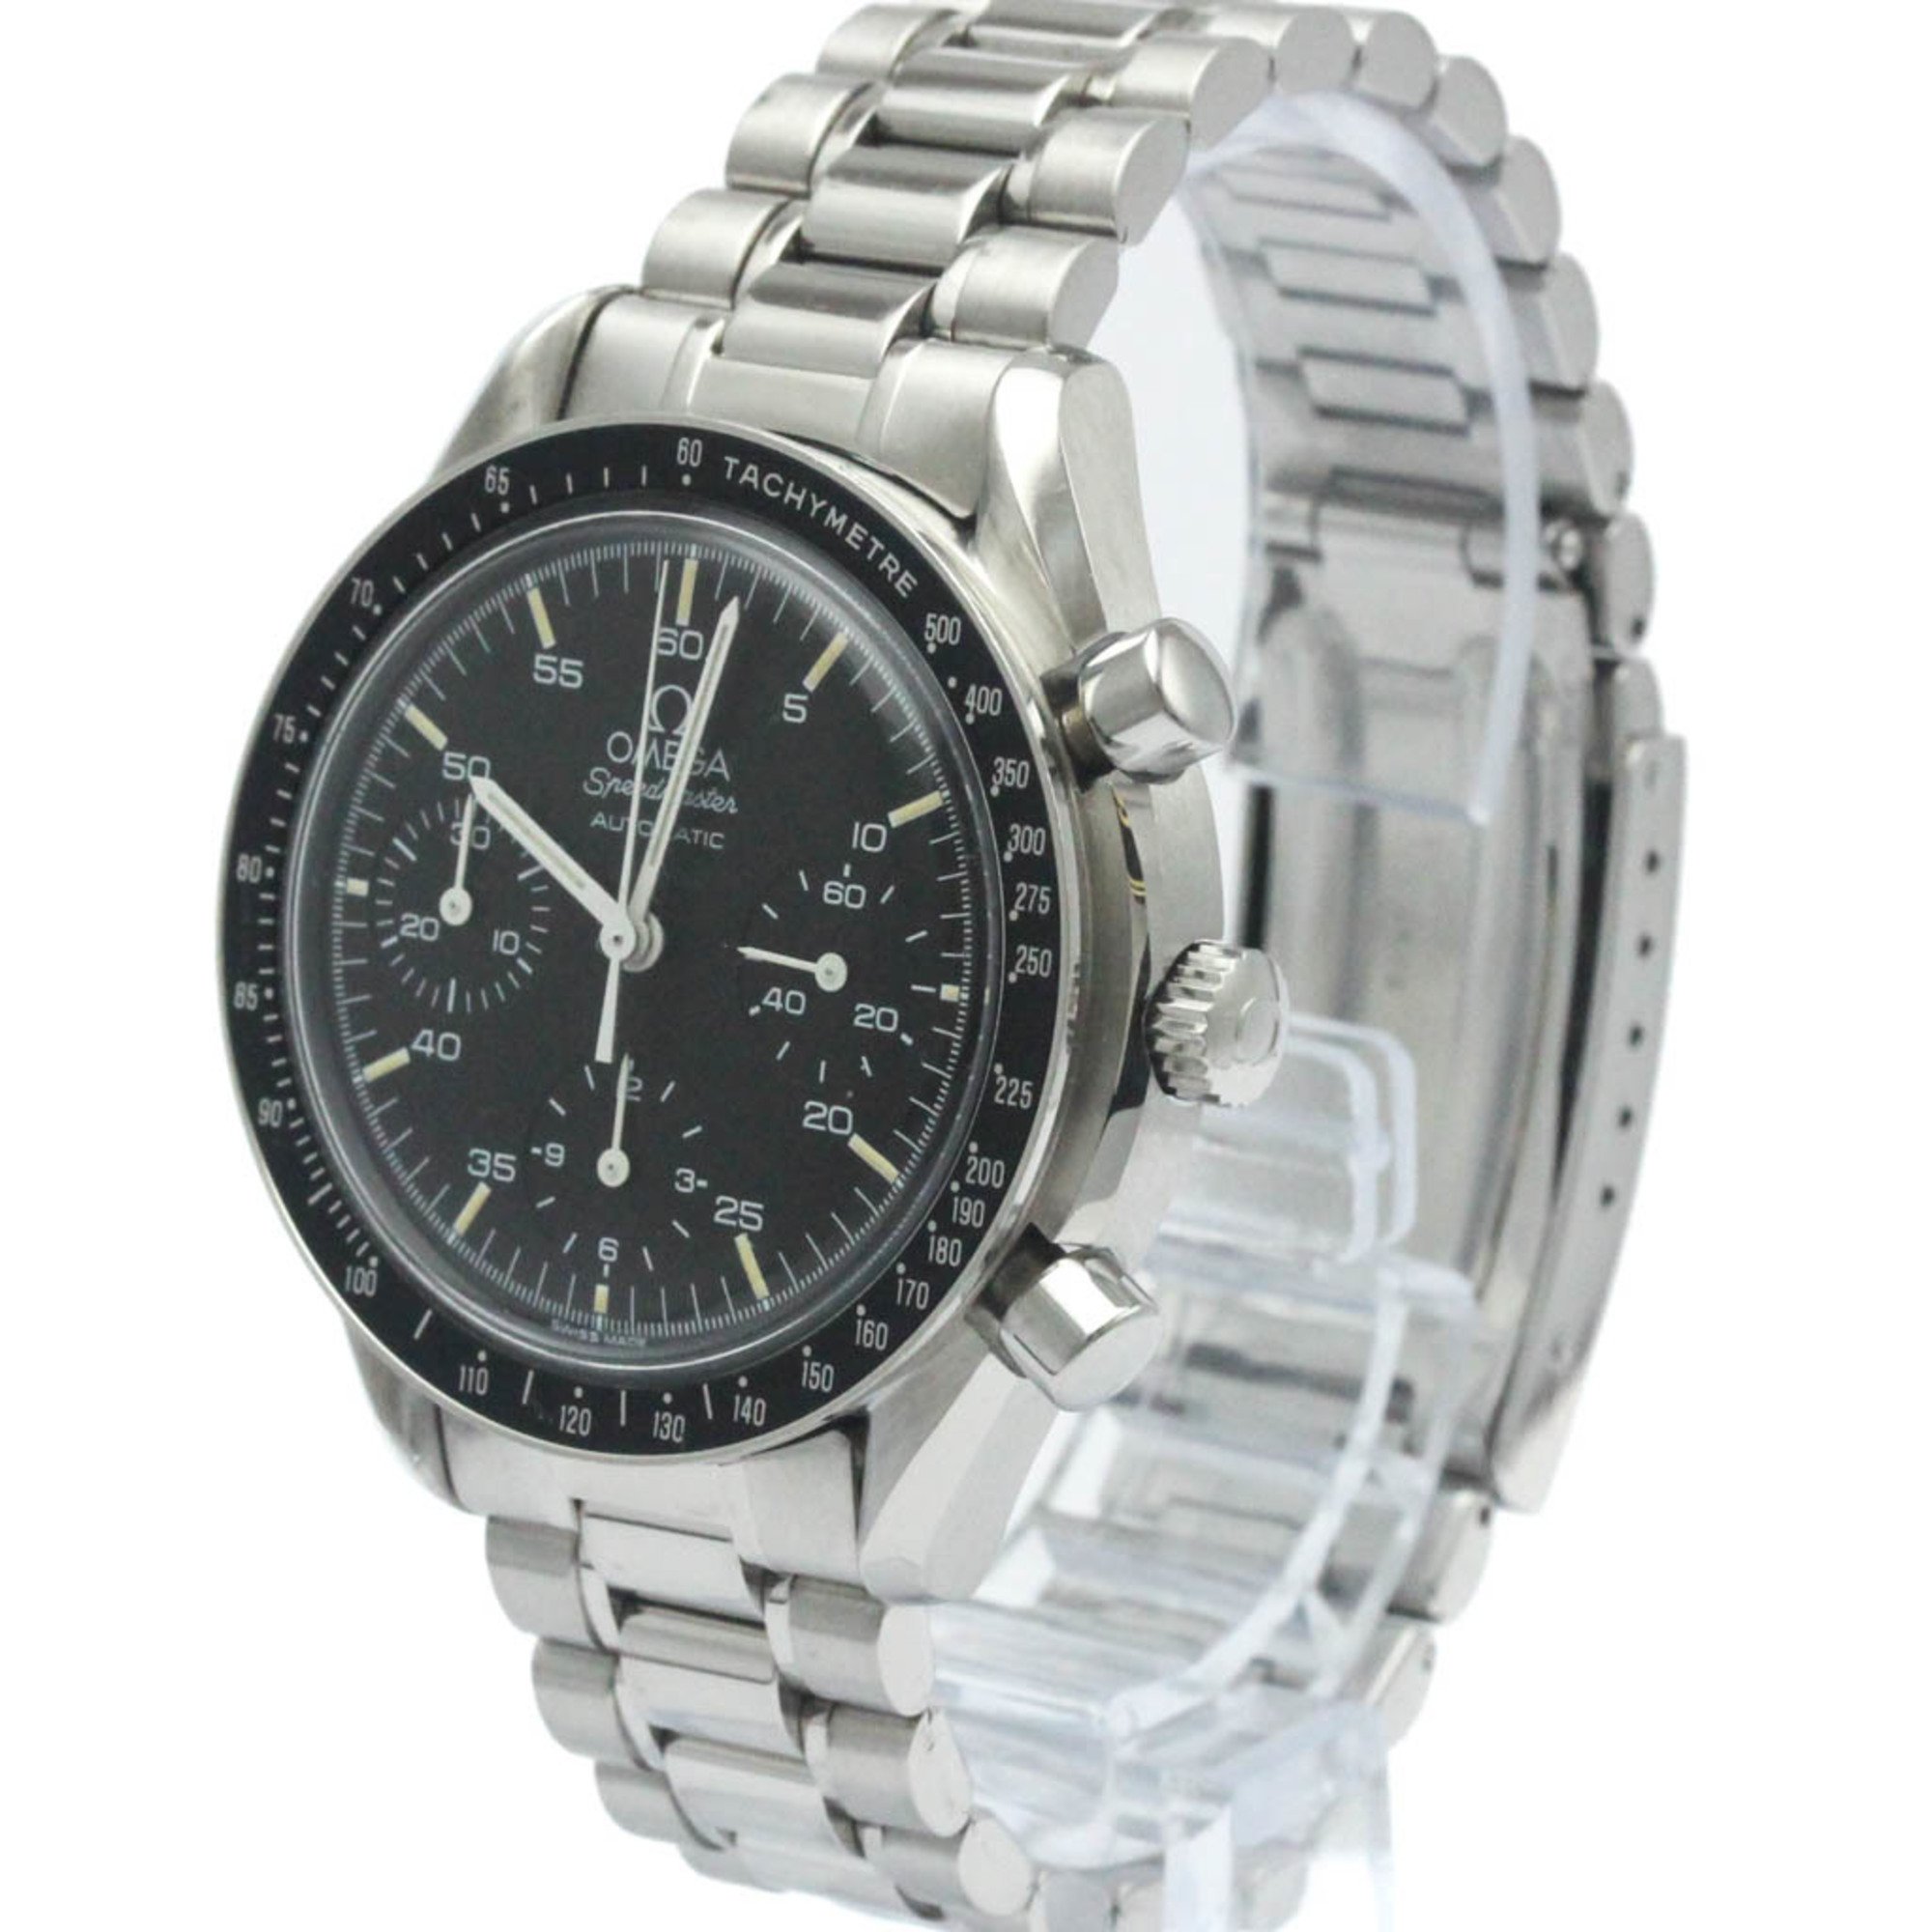 Polished OMEGA Speedmaster Automatic Steel Mens Watch 3510.50 BF566743